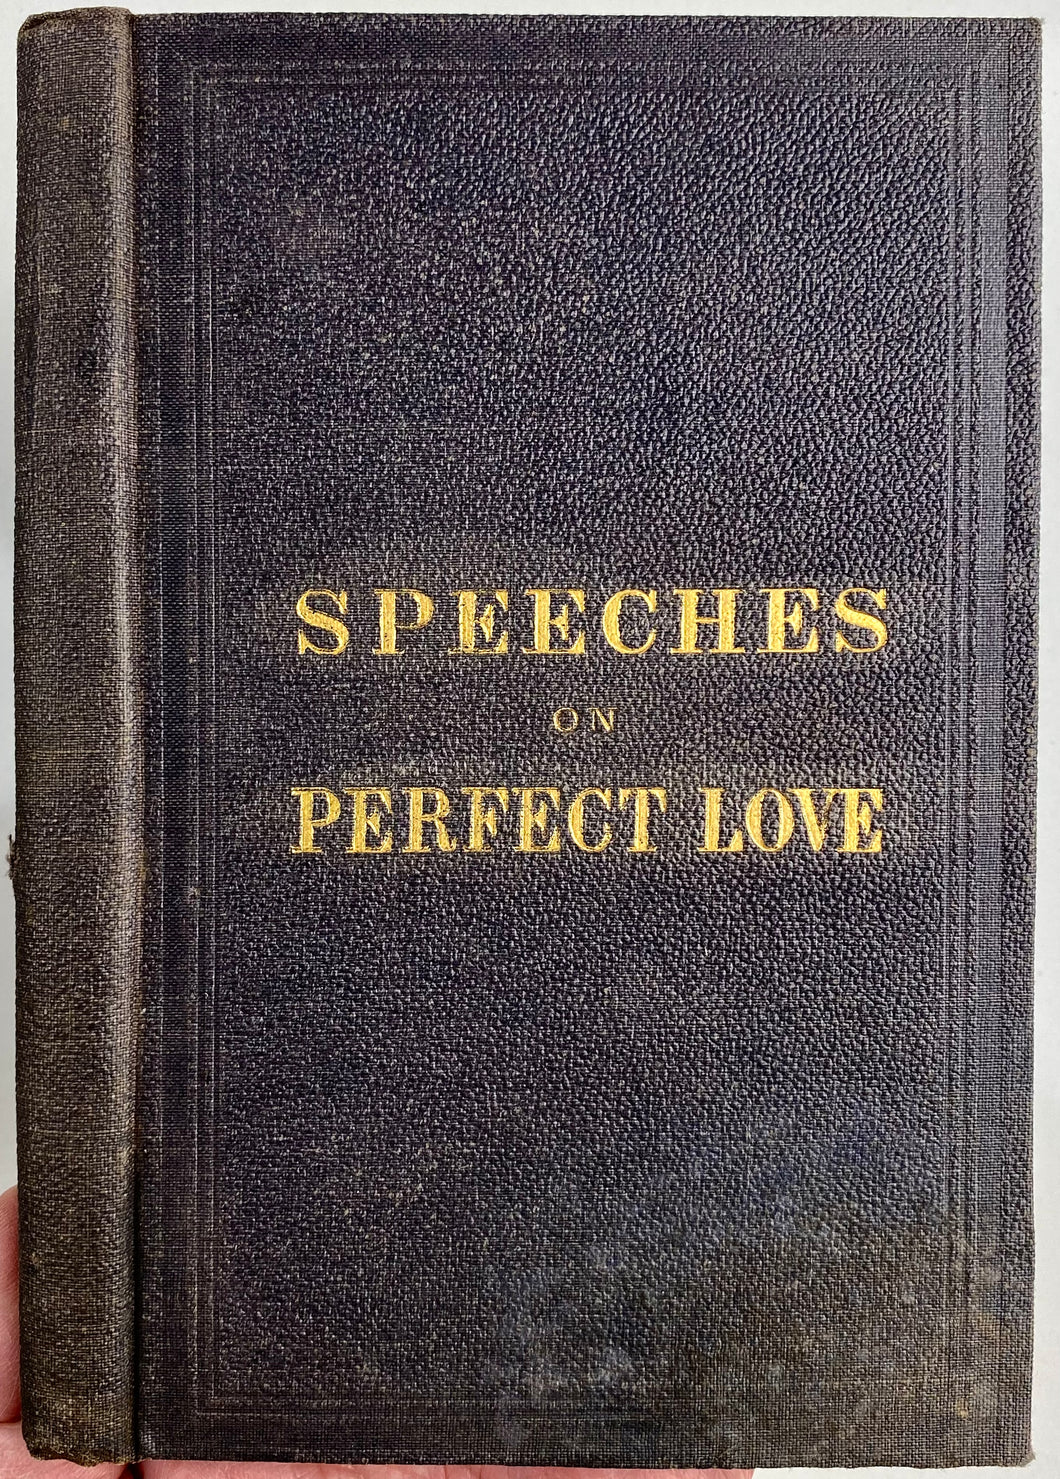 1868 CAMP-MEETINGS. Sermons on Perfect Love from the Newark Conference Camp-Meeting. Rare!